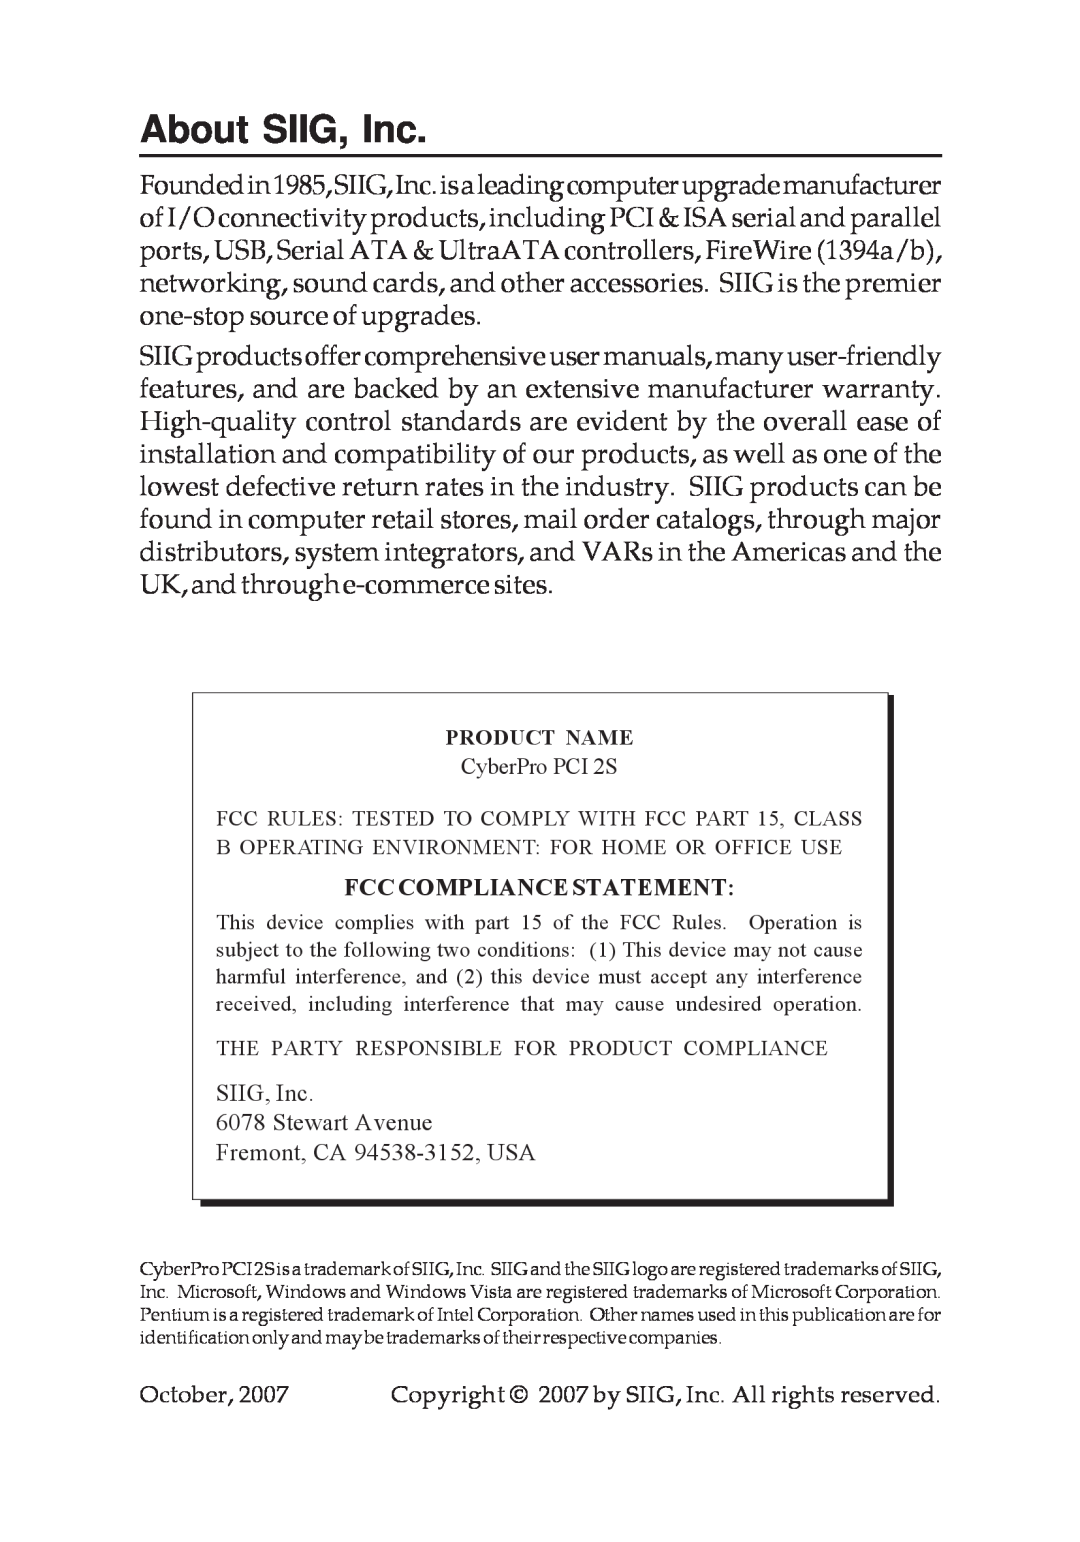 SIIG 2S manual About SIIG, Inc, Fcc Compliance Statement 